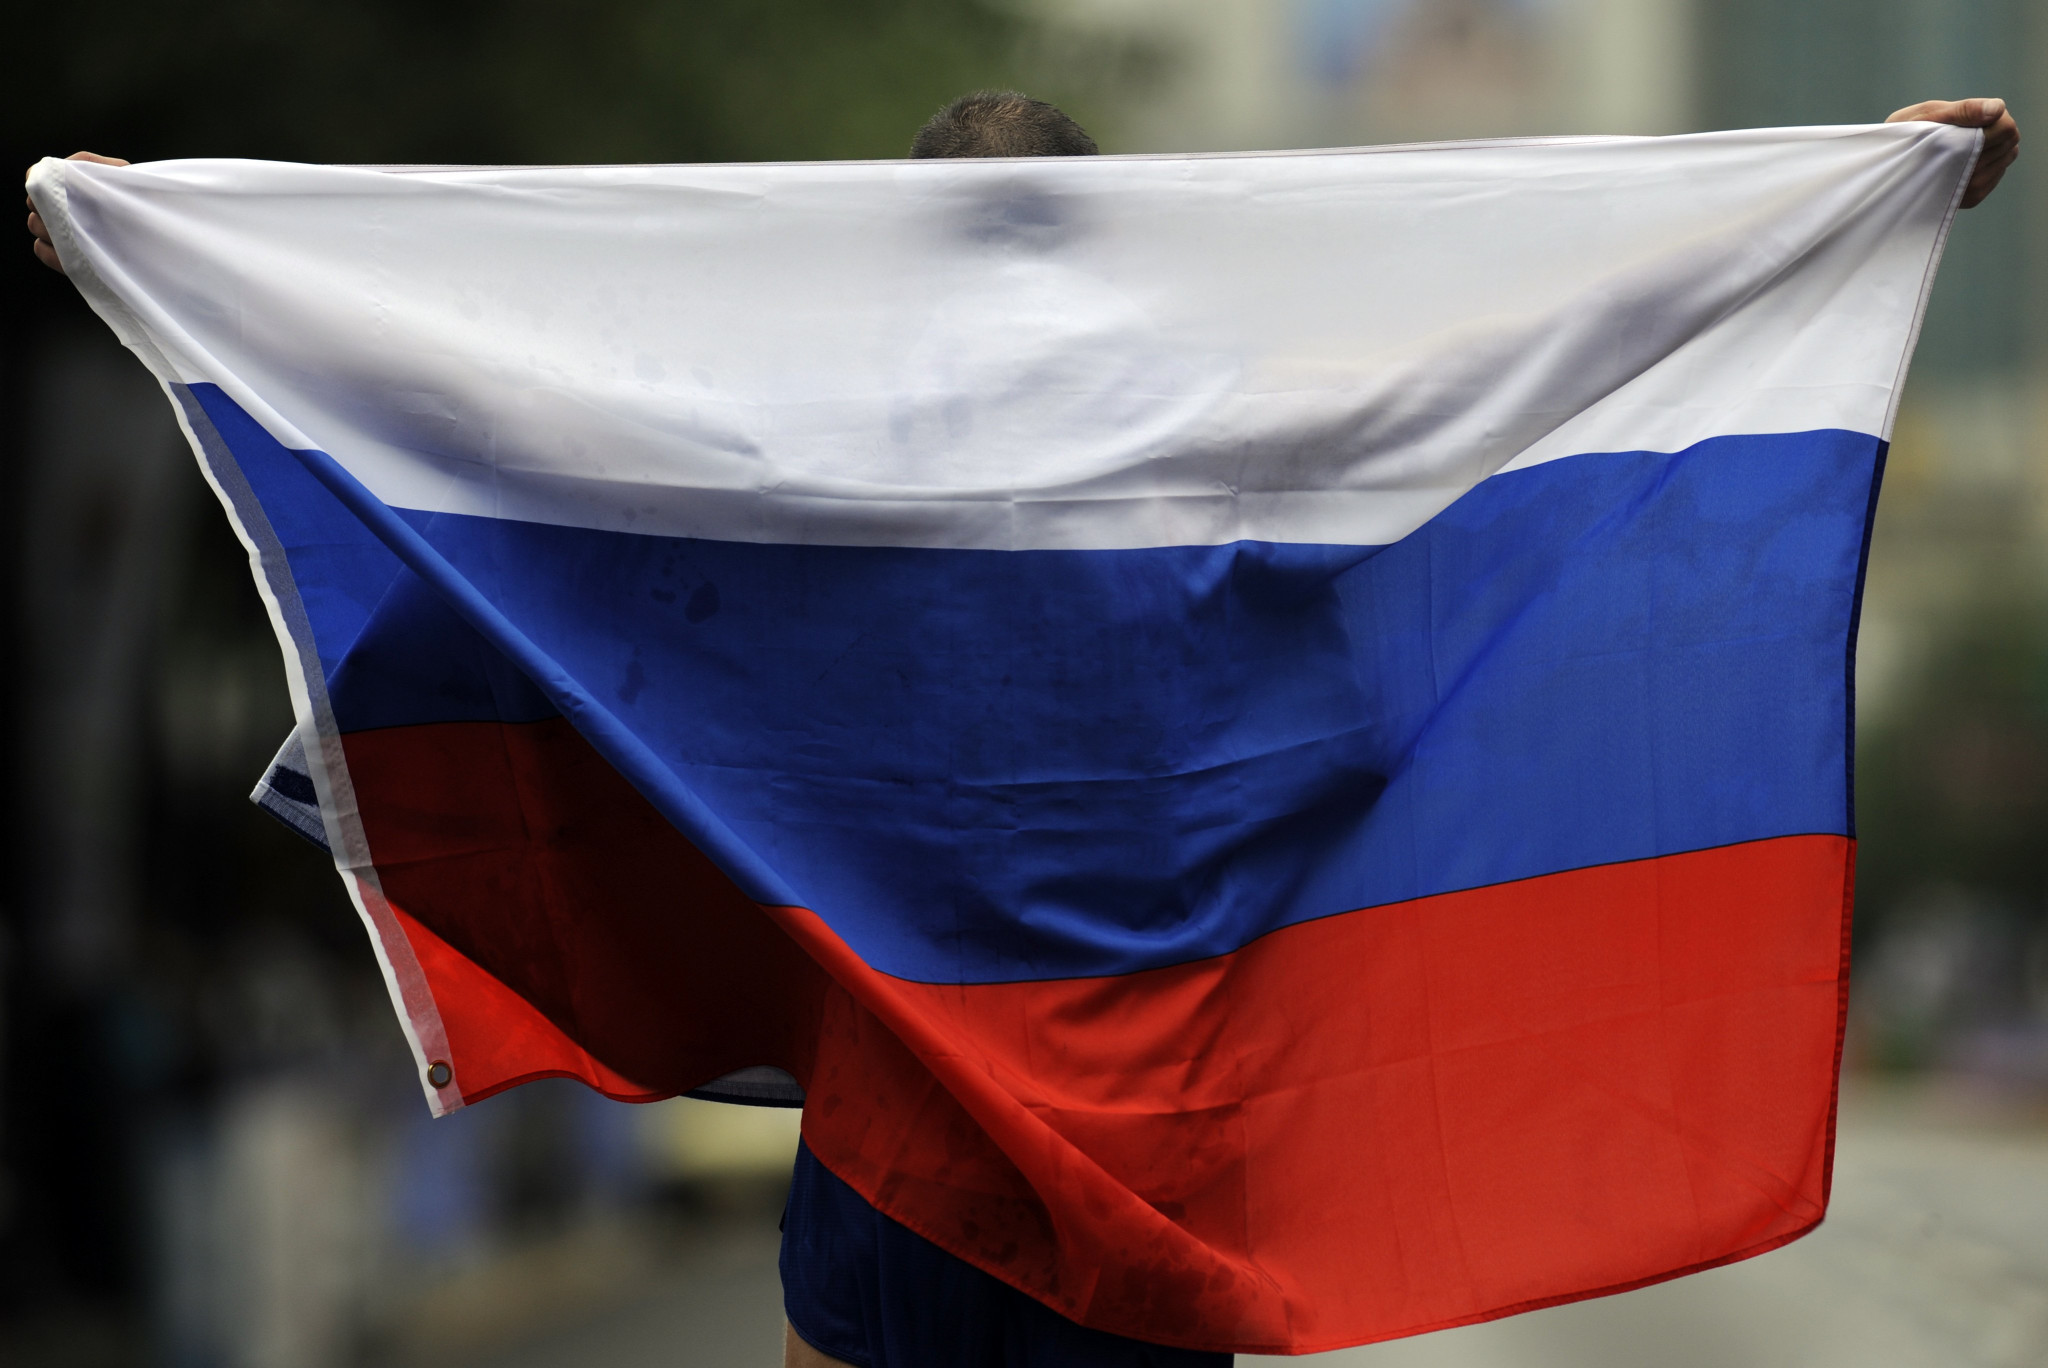 Russia's flag will be banned from all World Championships until December 2022 ©Getty Images